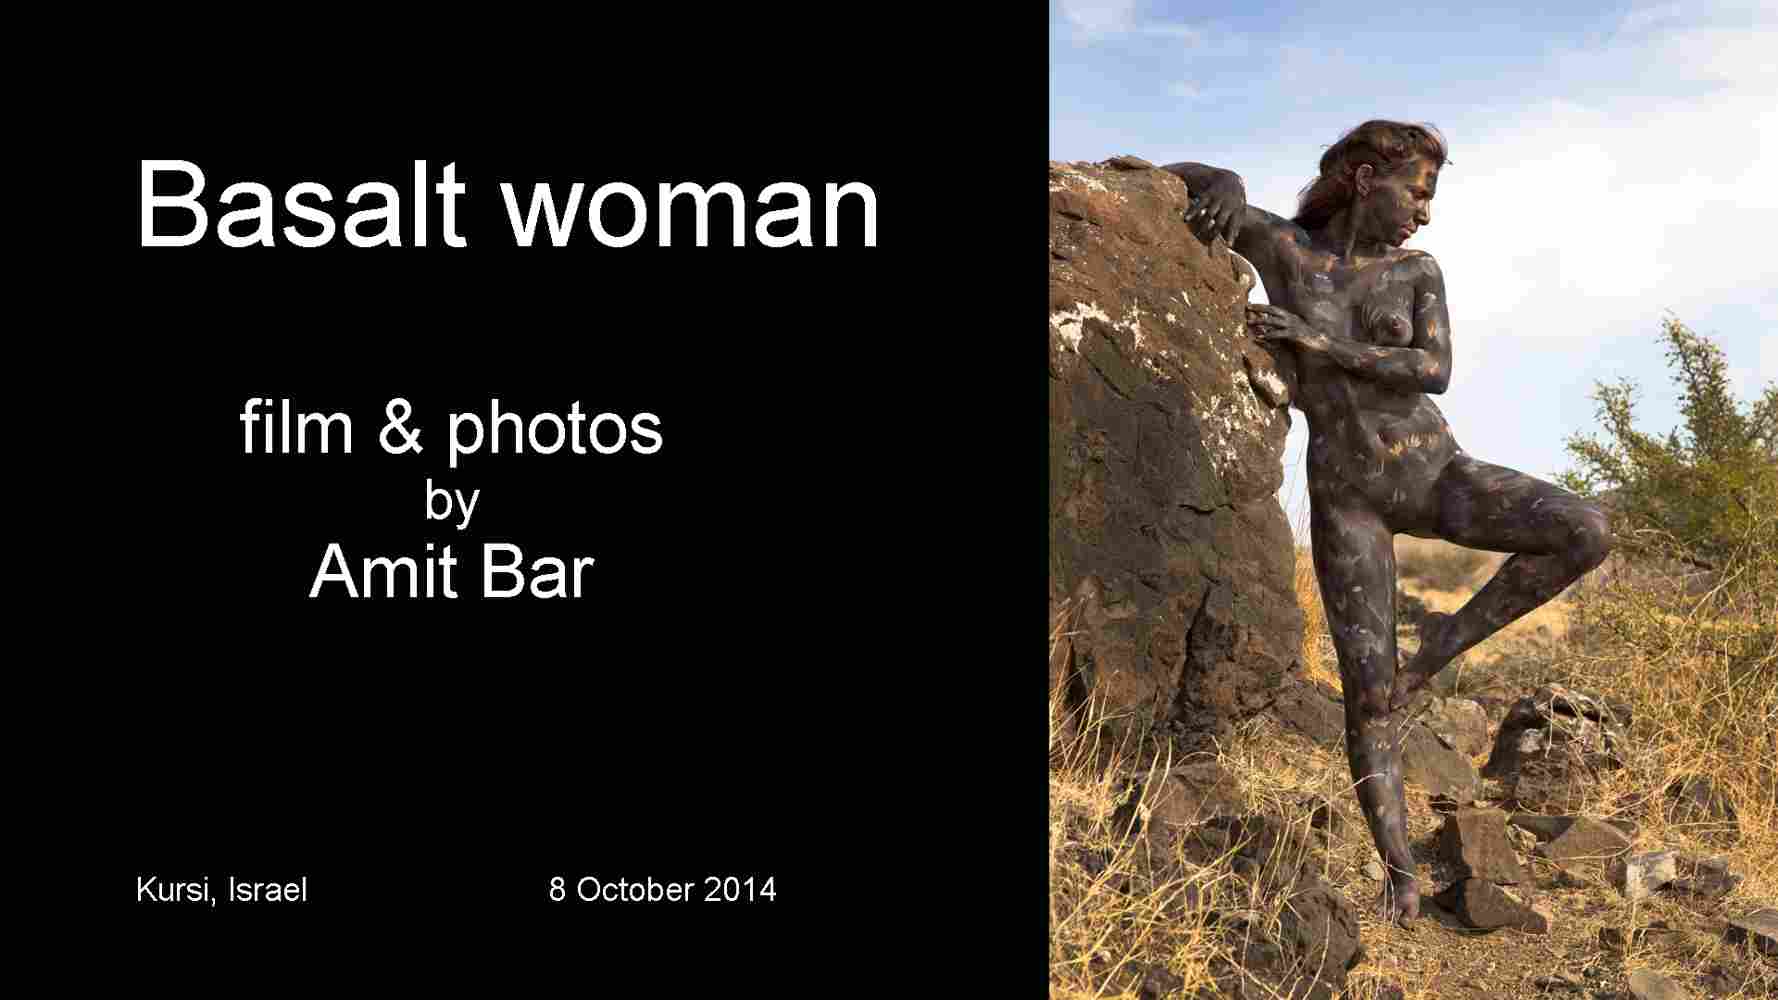 Basalt woman video: The black basalt rocks and yellow thorns of the Golan Heights are the inspiration for this film.